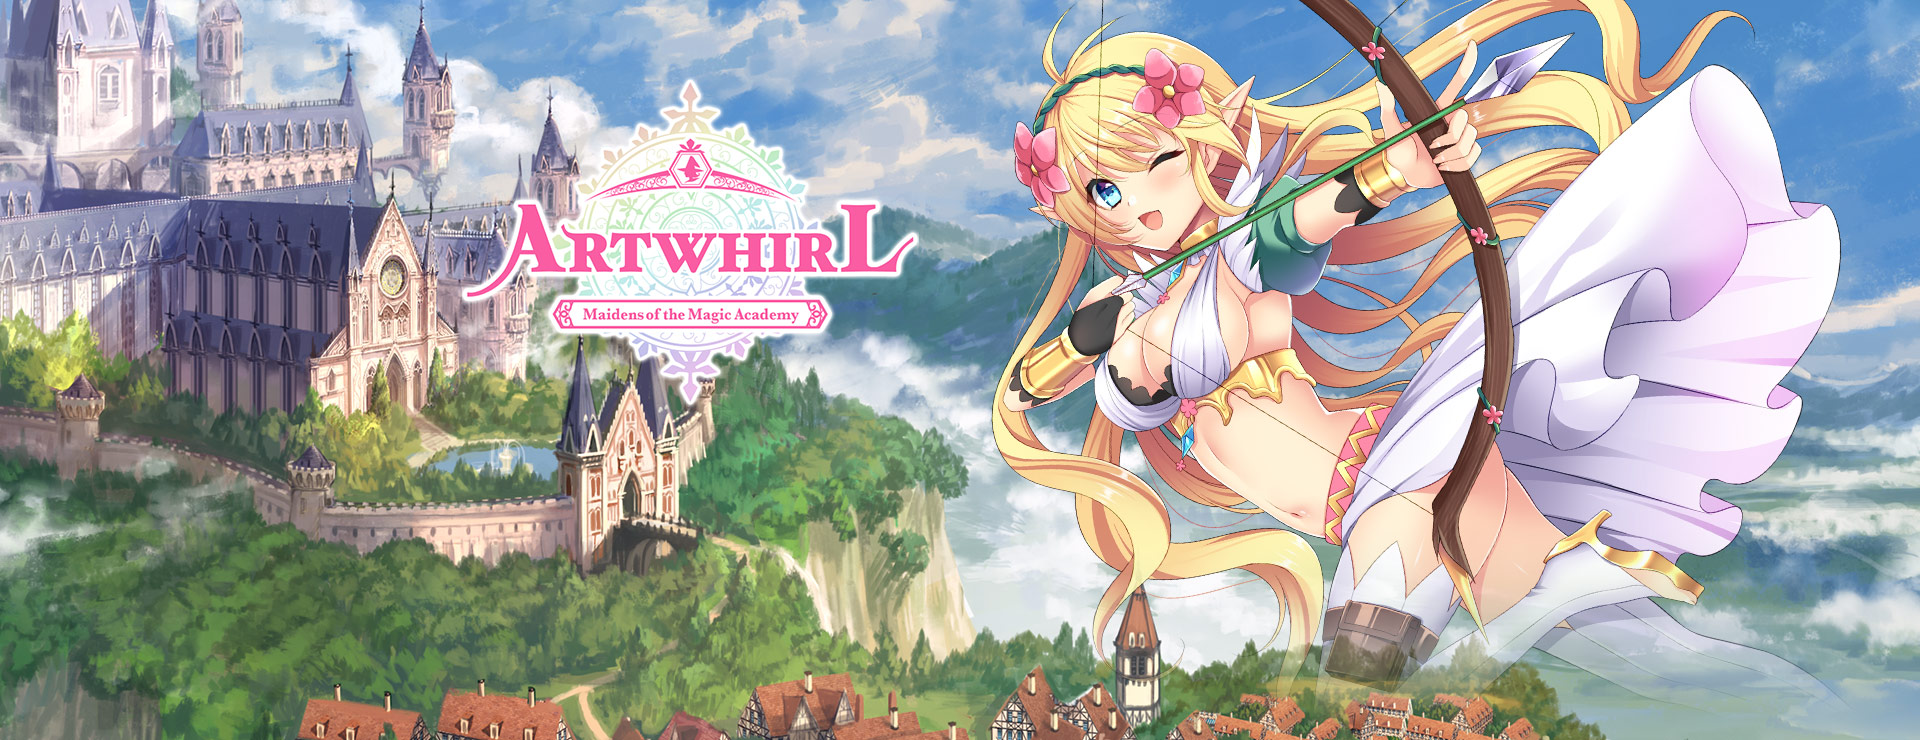 Artwhirl -Maidens of the Magic Academy- - RPG Game